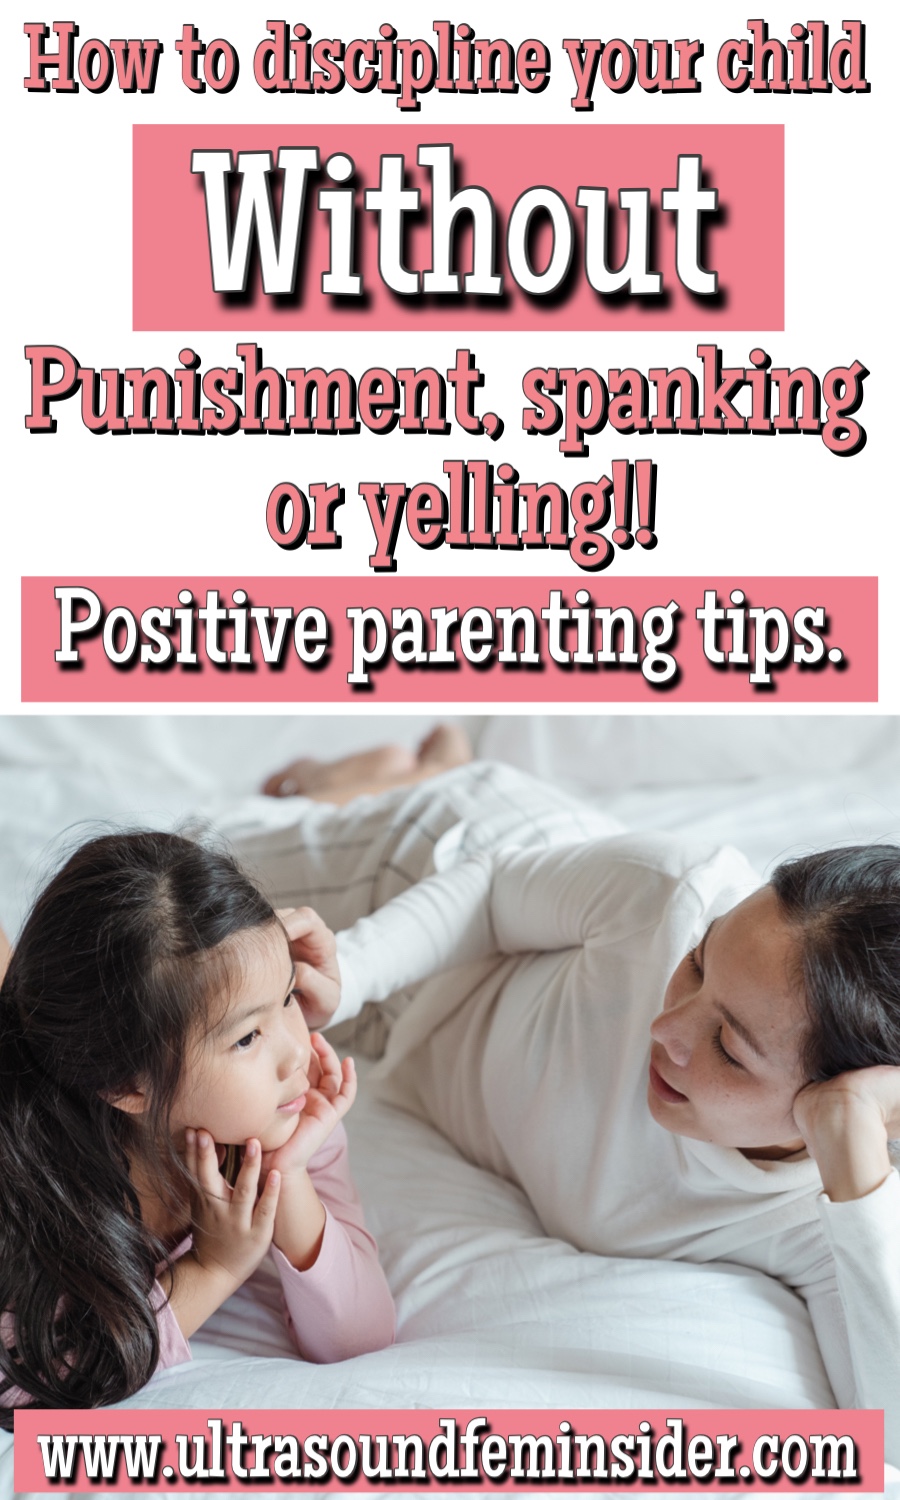 Effective Tips To Help You Discipline Your Kid without punishment, spanking or yelling with positive parenting methods.